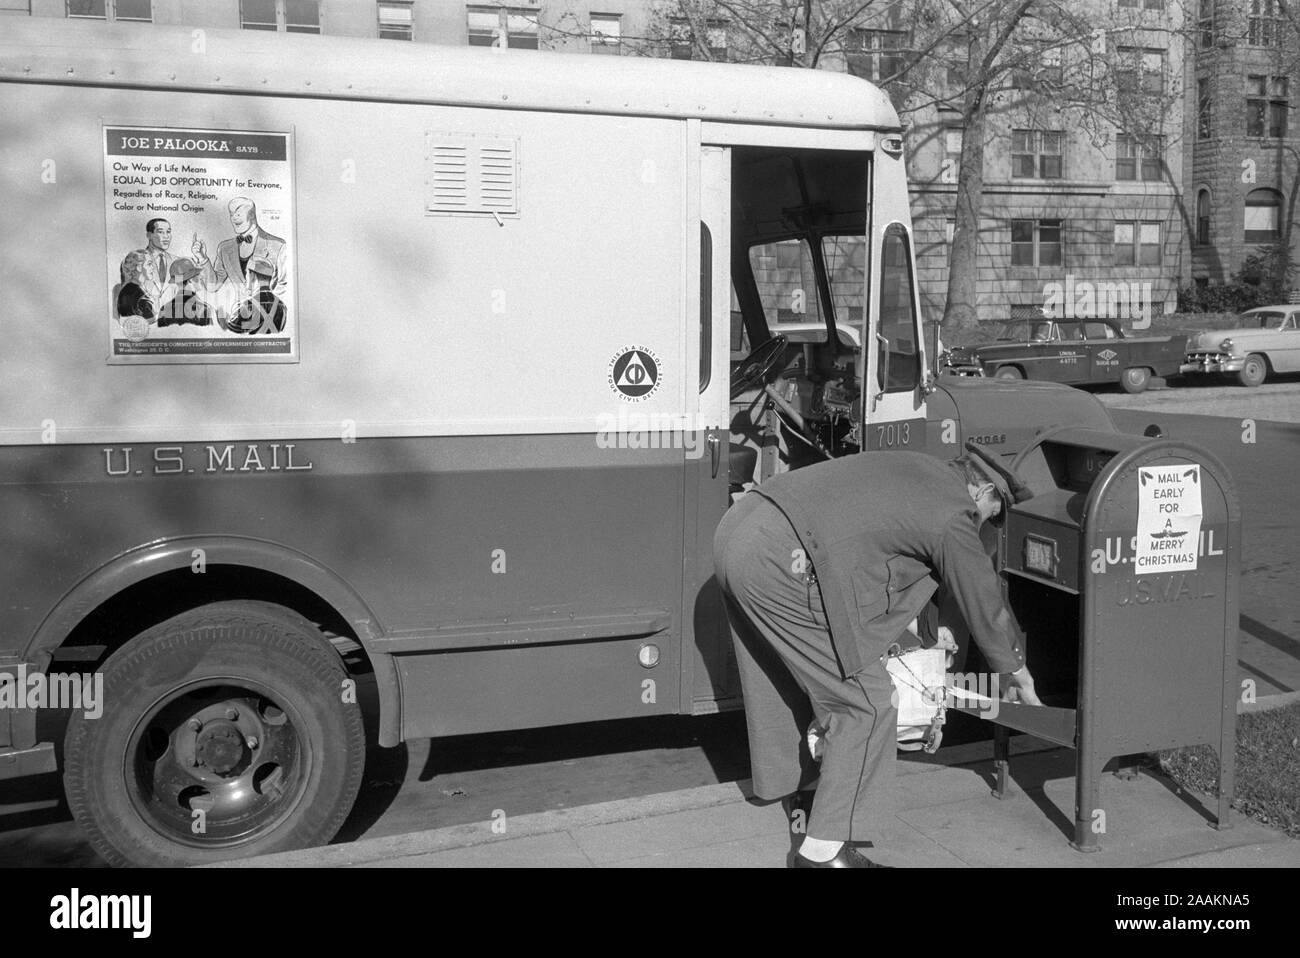 Mailman picking up Mail from Mailbox, Job Opportunity Poster on Side of Mail Truck, Washington, D.C., USA, photograph by Thomas J. O'Halloran, February 1957 Stock Photo